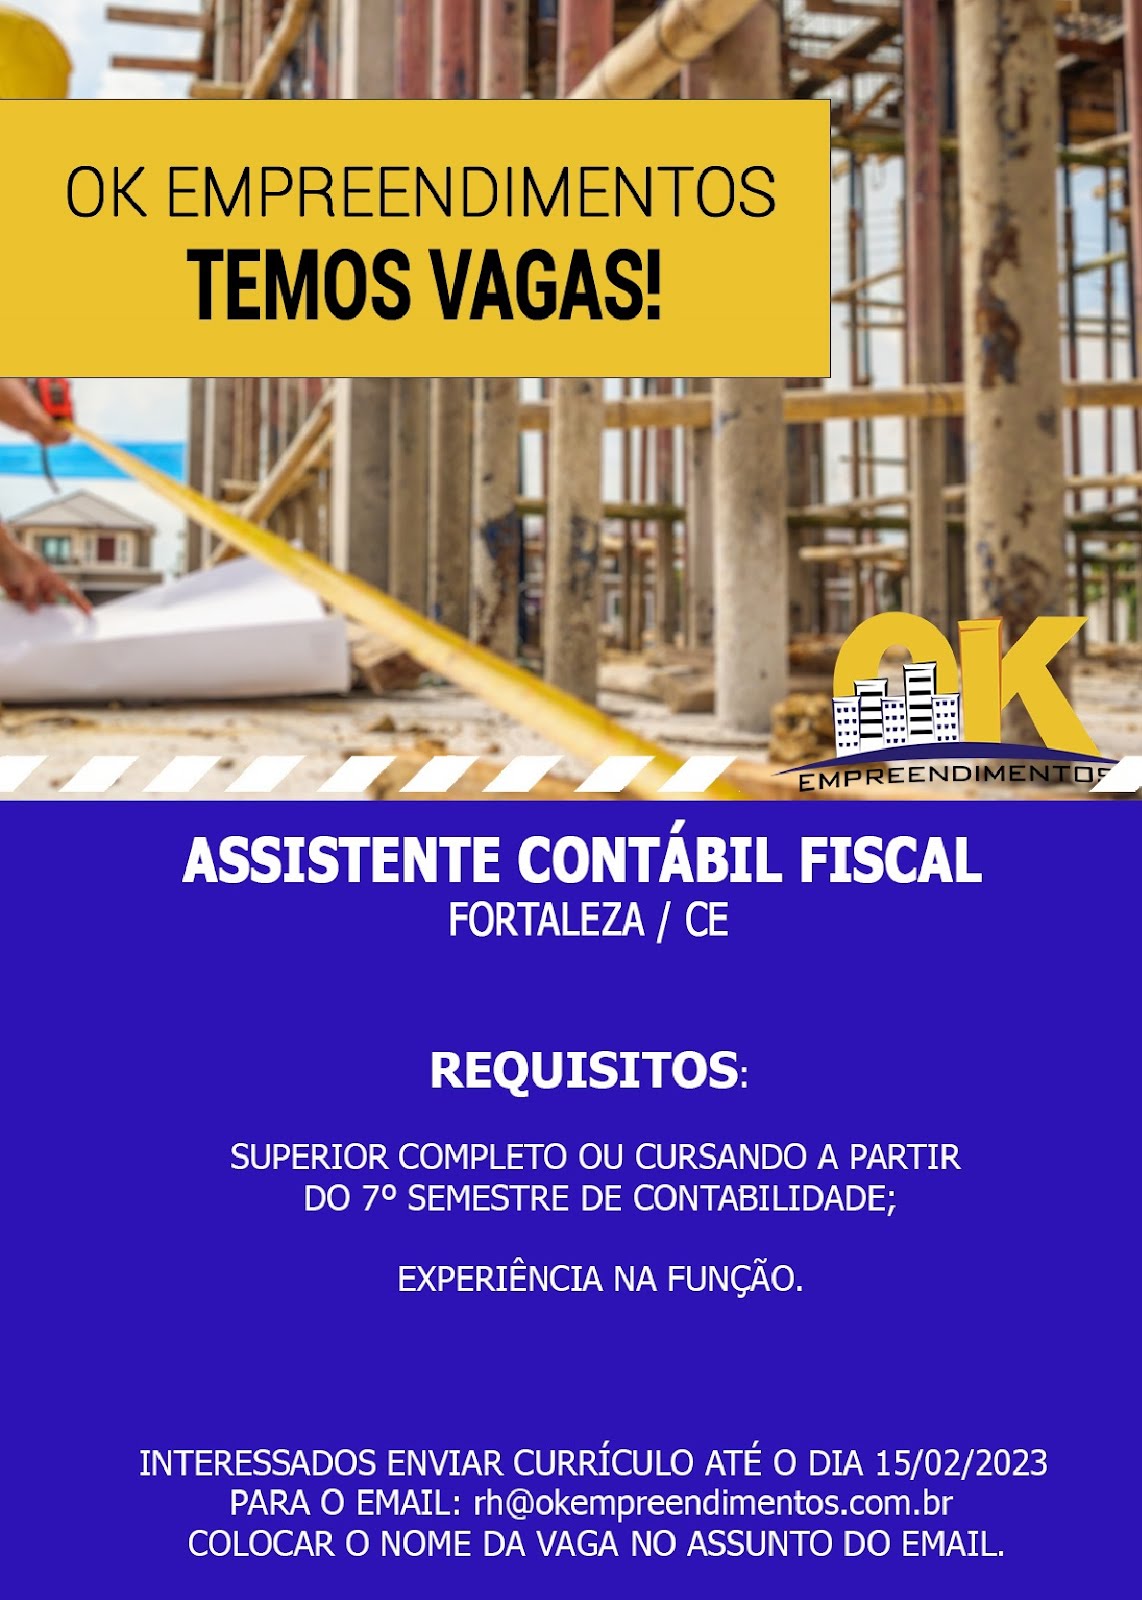 ASSISTENTE CONTÁBIL FISCAL